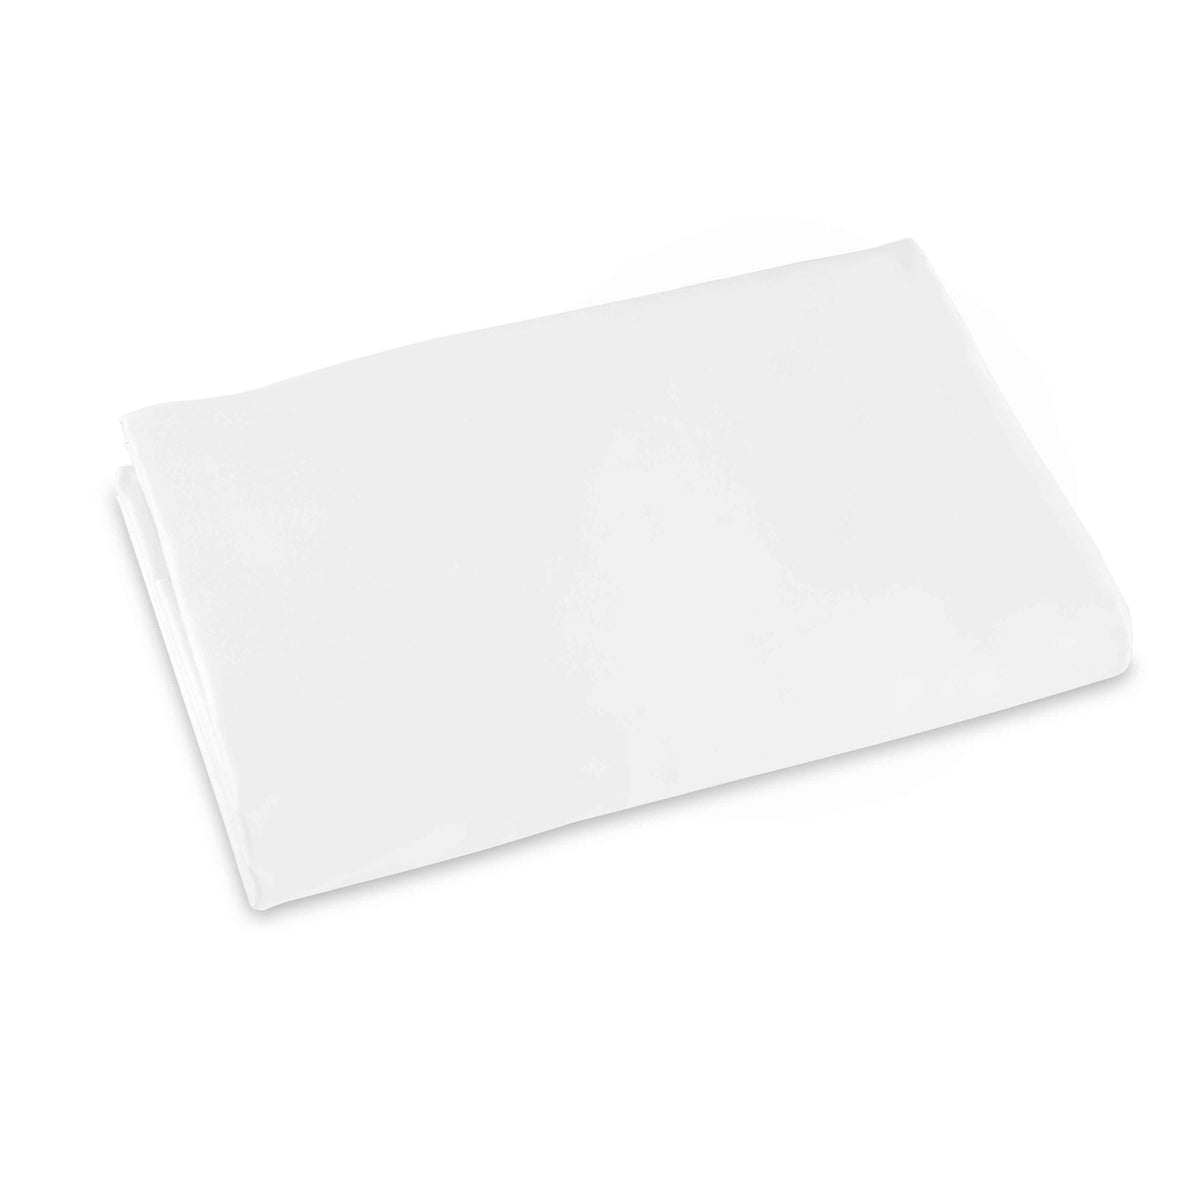 Clear Image of Signoria Tuscan Dreams Fitted Sheet in White Color